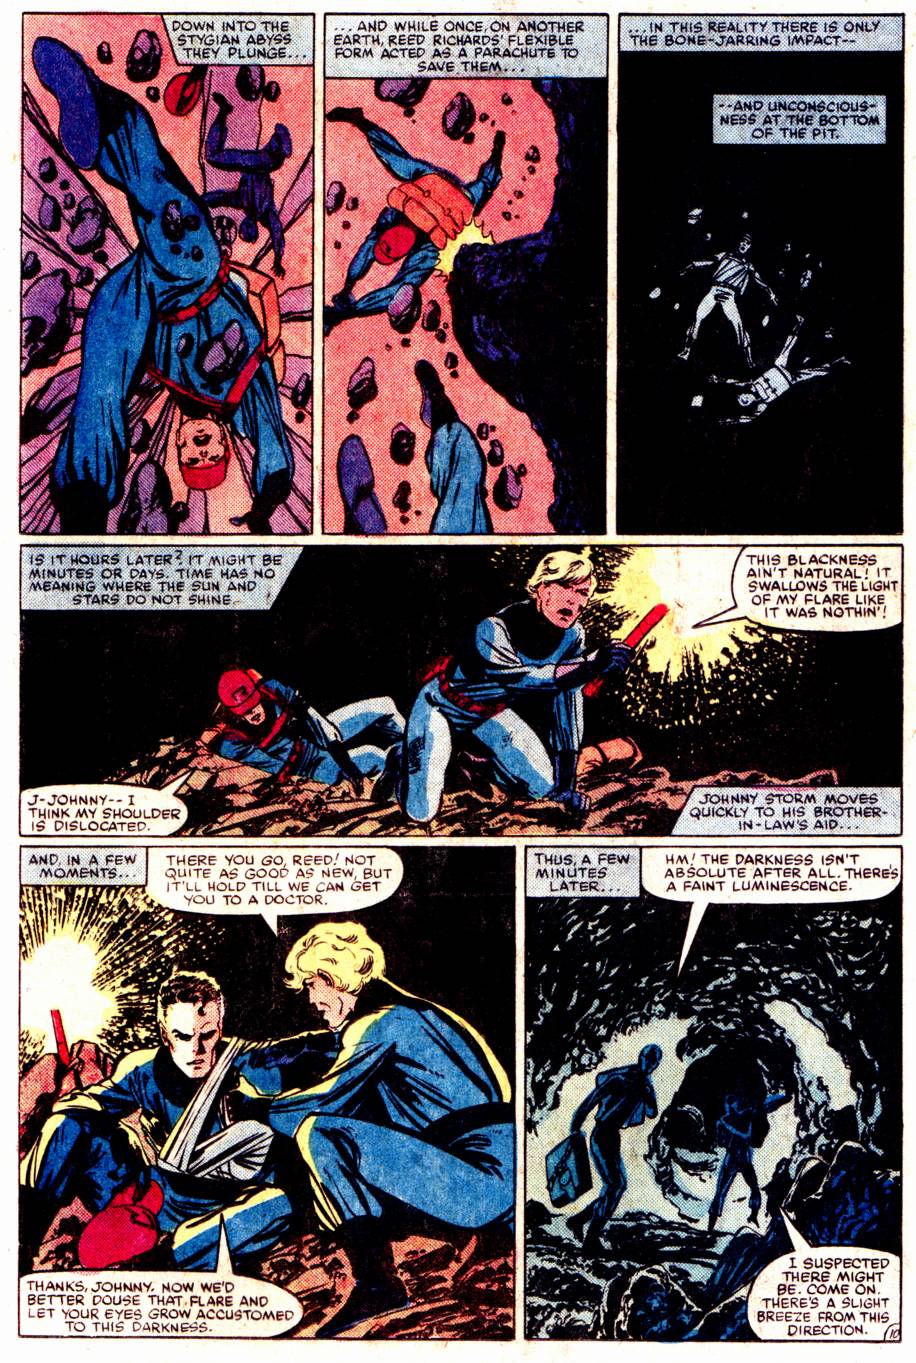 What If? (1977) issue 36 - The Fantastic Four Had Not Gained Their Powers - Page 11